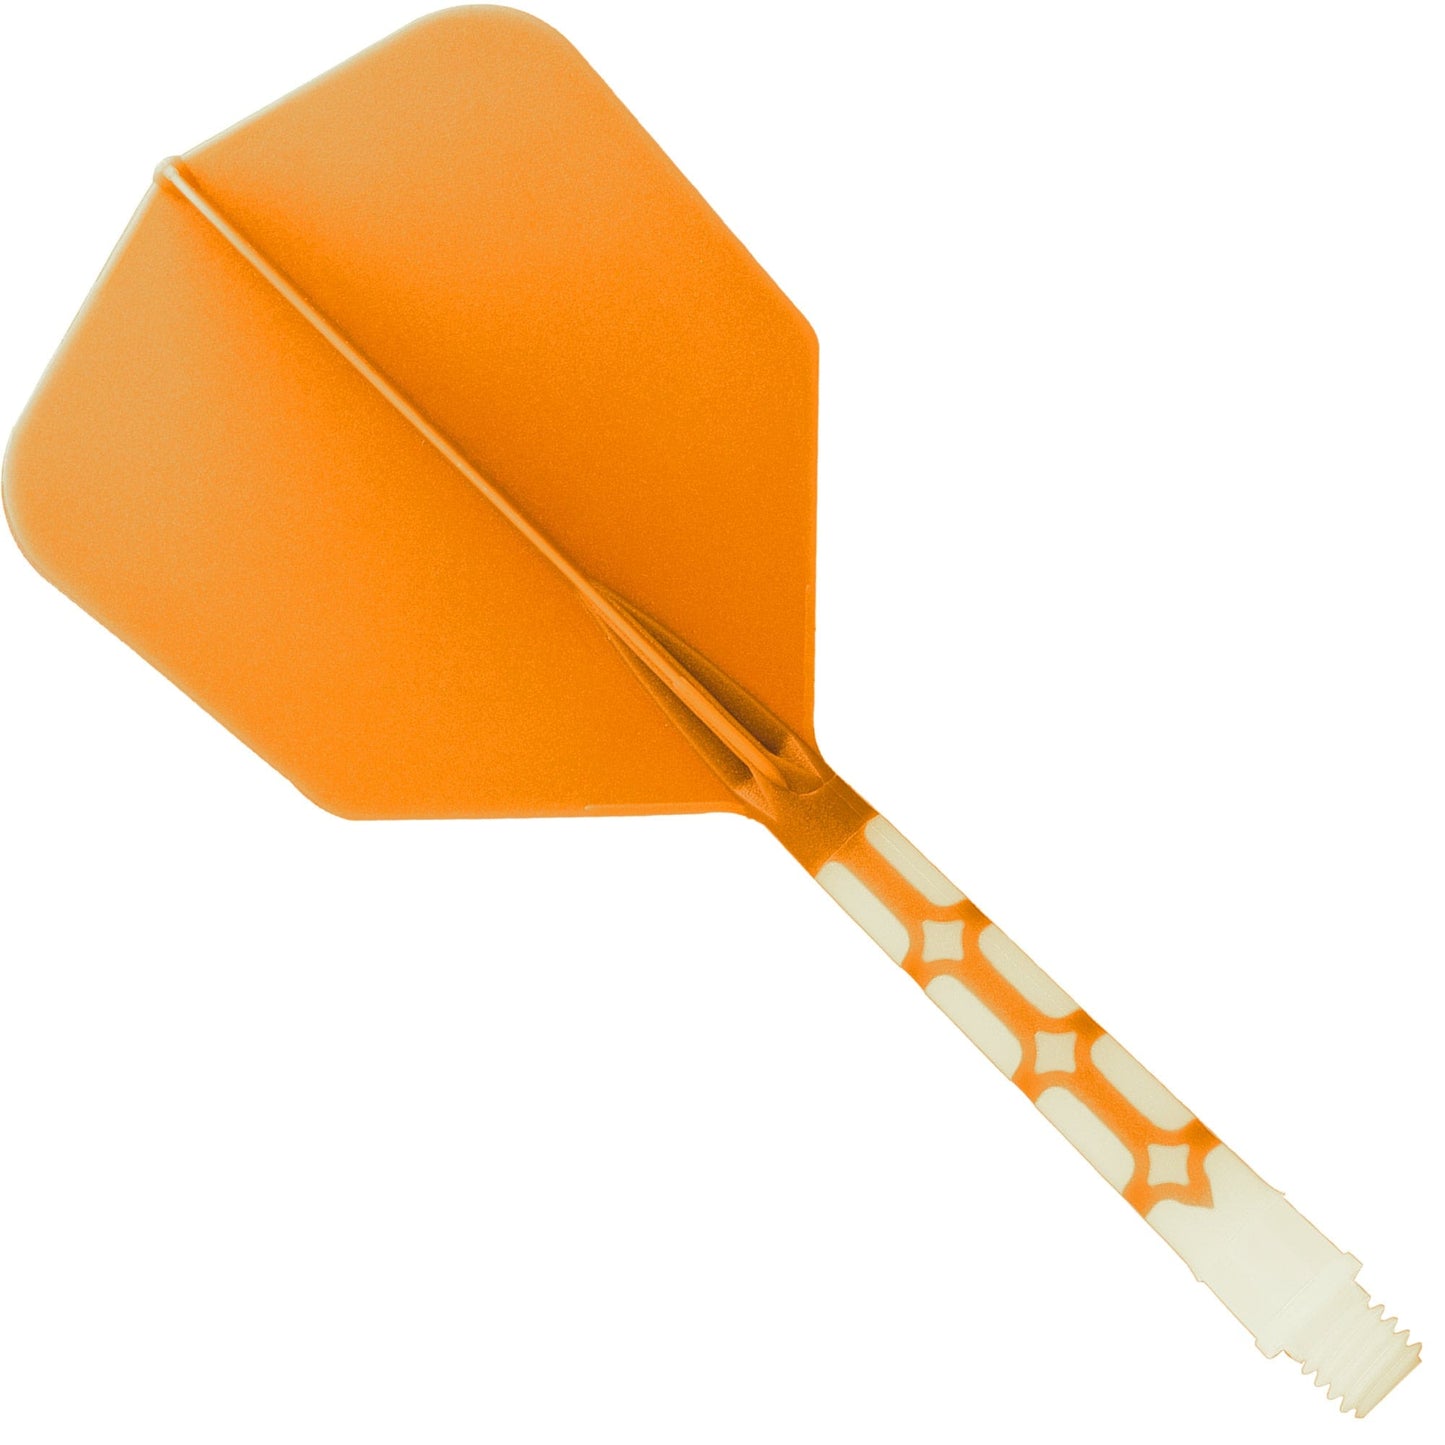 Cuesoul Rost T19 Integrated Dart Shaft and Flights - Big Wing - White with Orange Flight Long